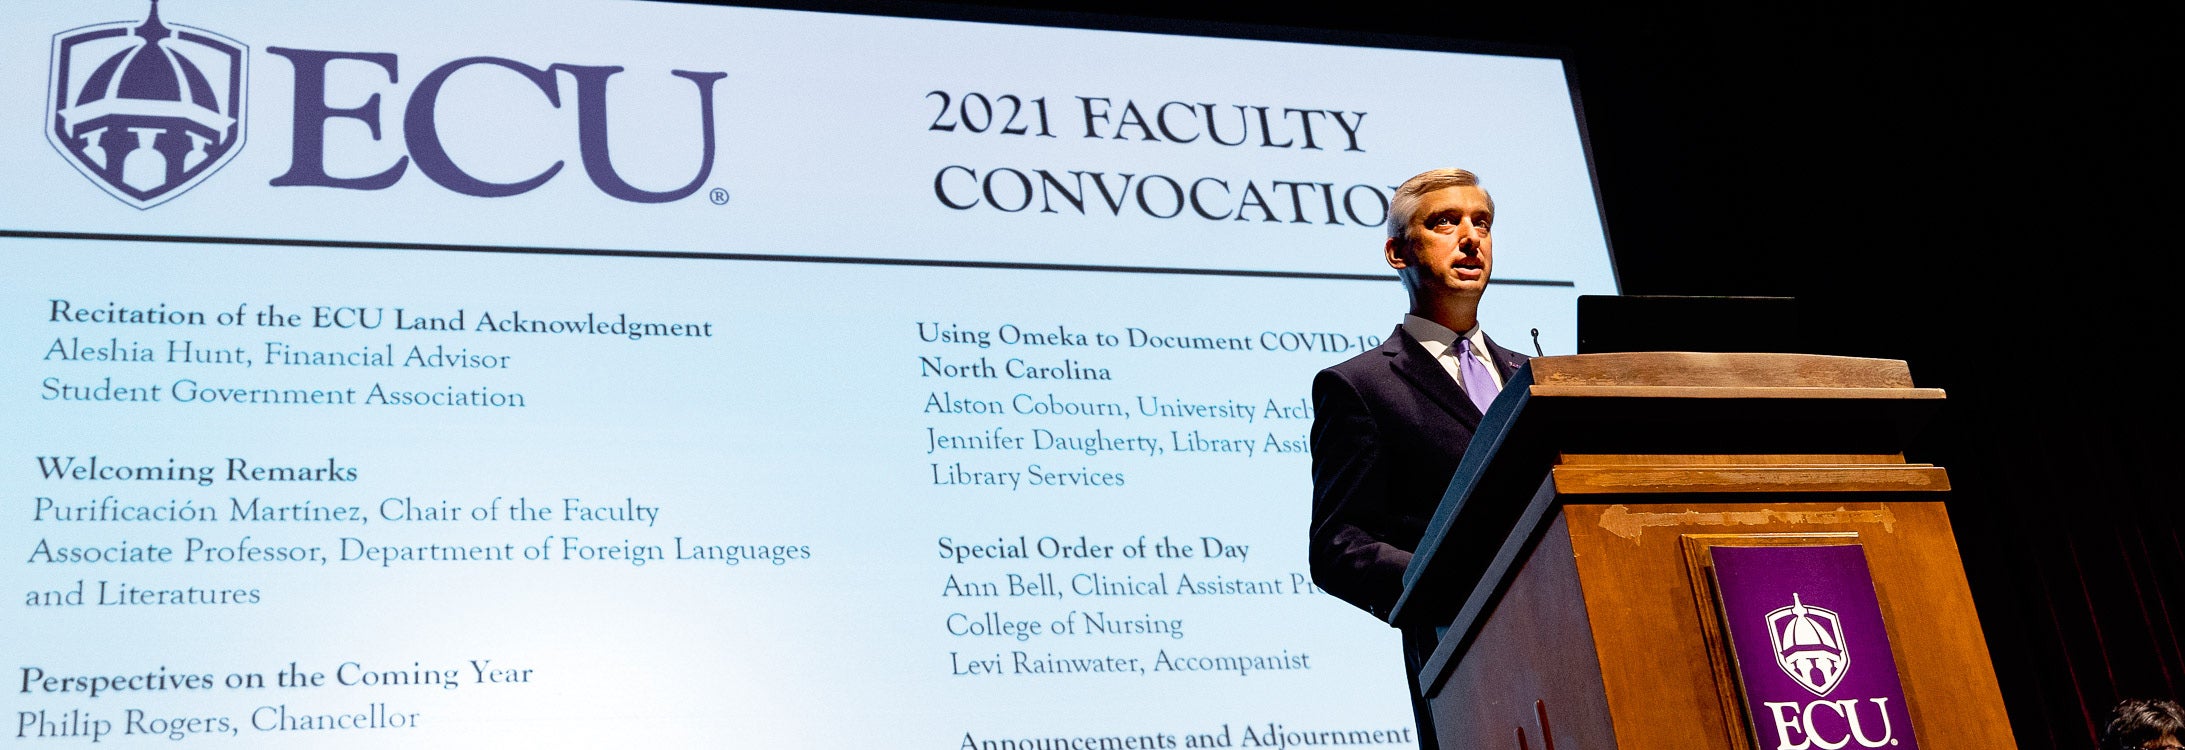 Chancellor Philip Rogers addresses the faculty during convocation for the 2021-22 academic year.